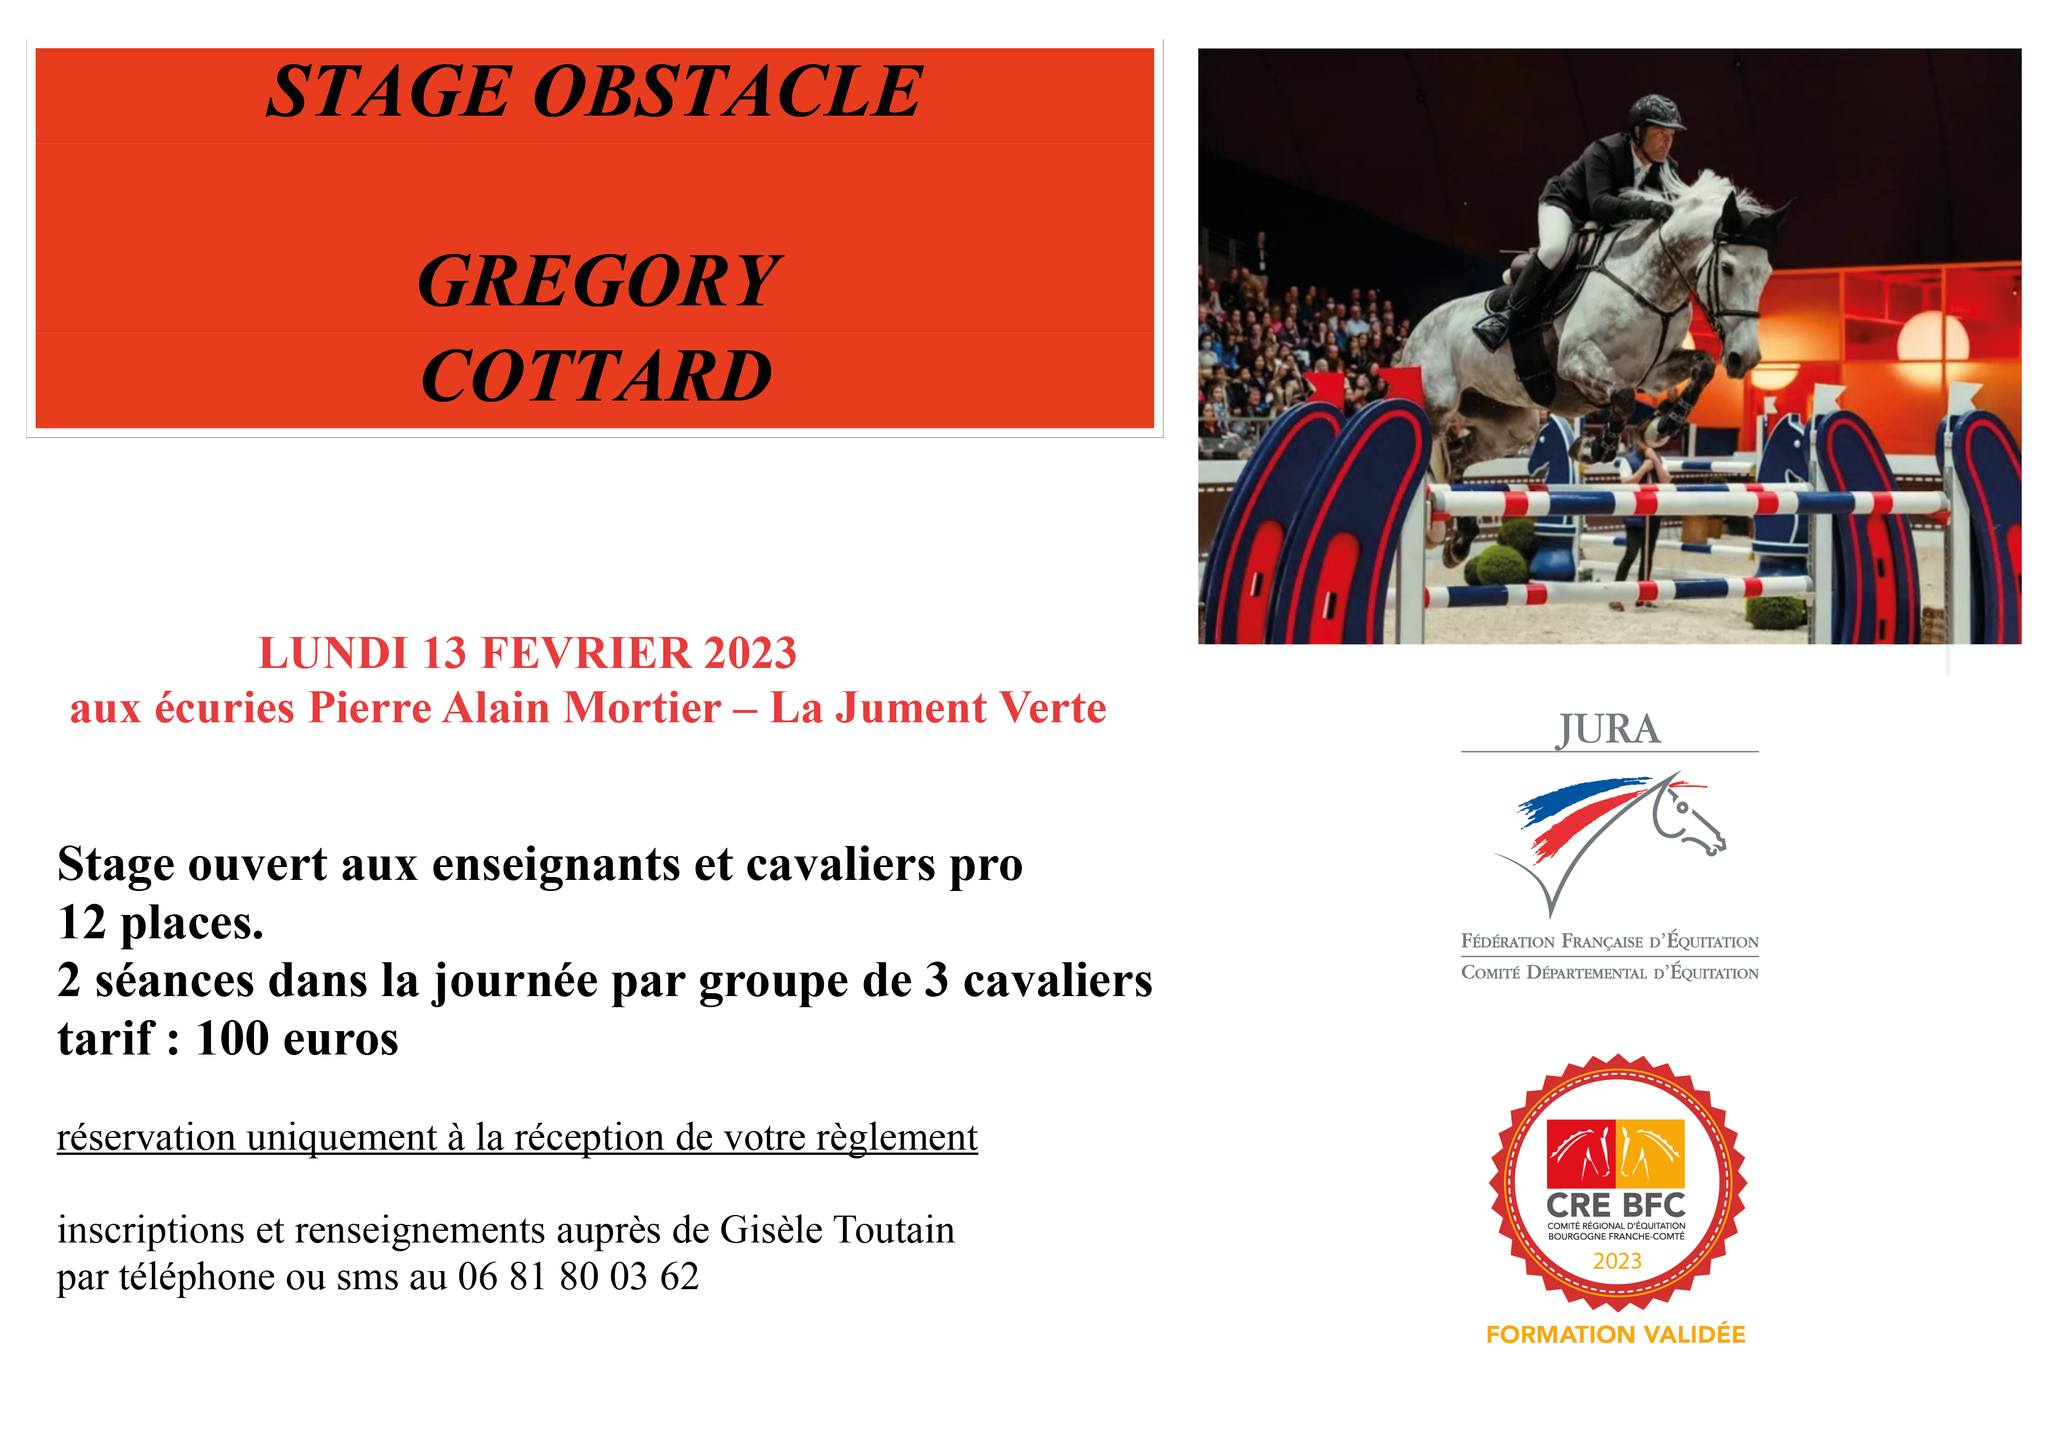 Stage Obtsacle avec Gregory Cottard